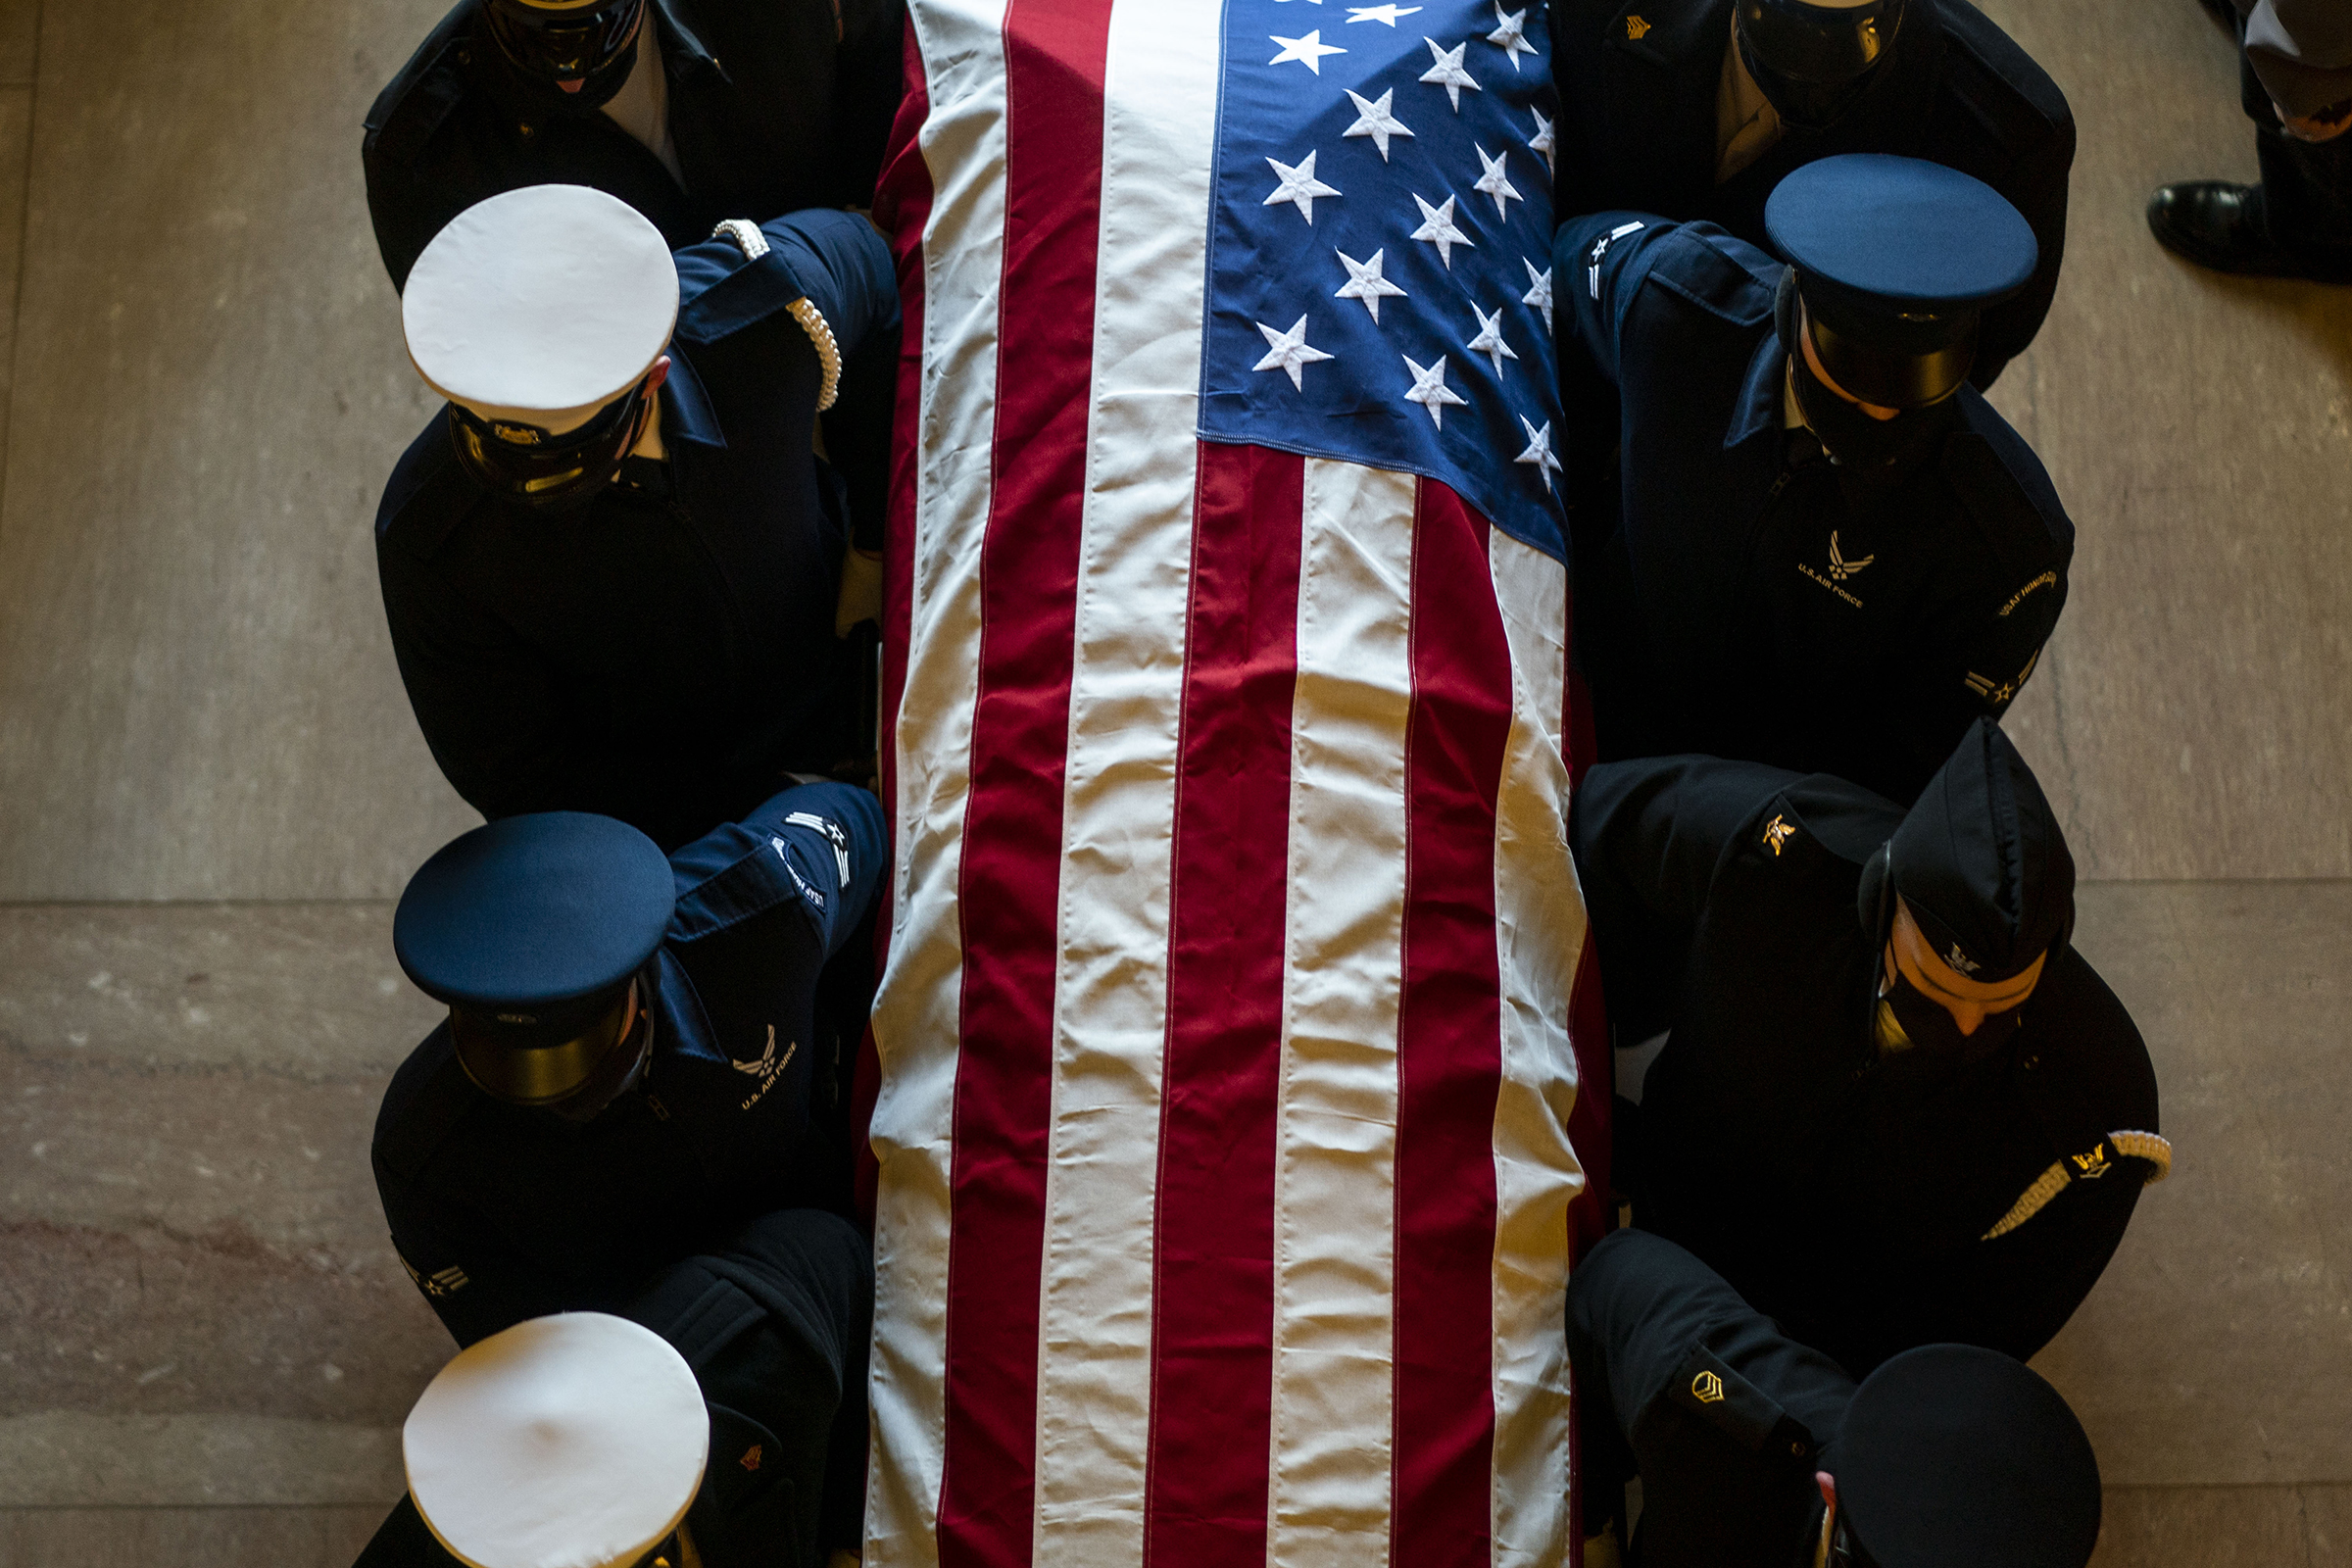 A military honor guard rehearses carrying a casket into the U.S. Capitol Building ahead of former Senate Majority Leader Harry Reid lying in state in the U.S. Capitol. (Kent Nishimura—Los Angeles Times/Getty Images)